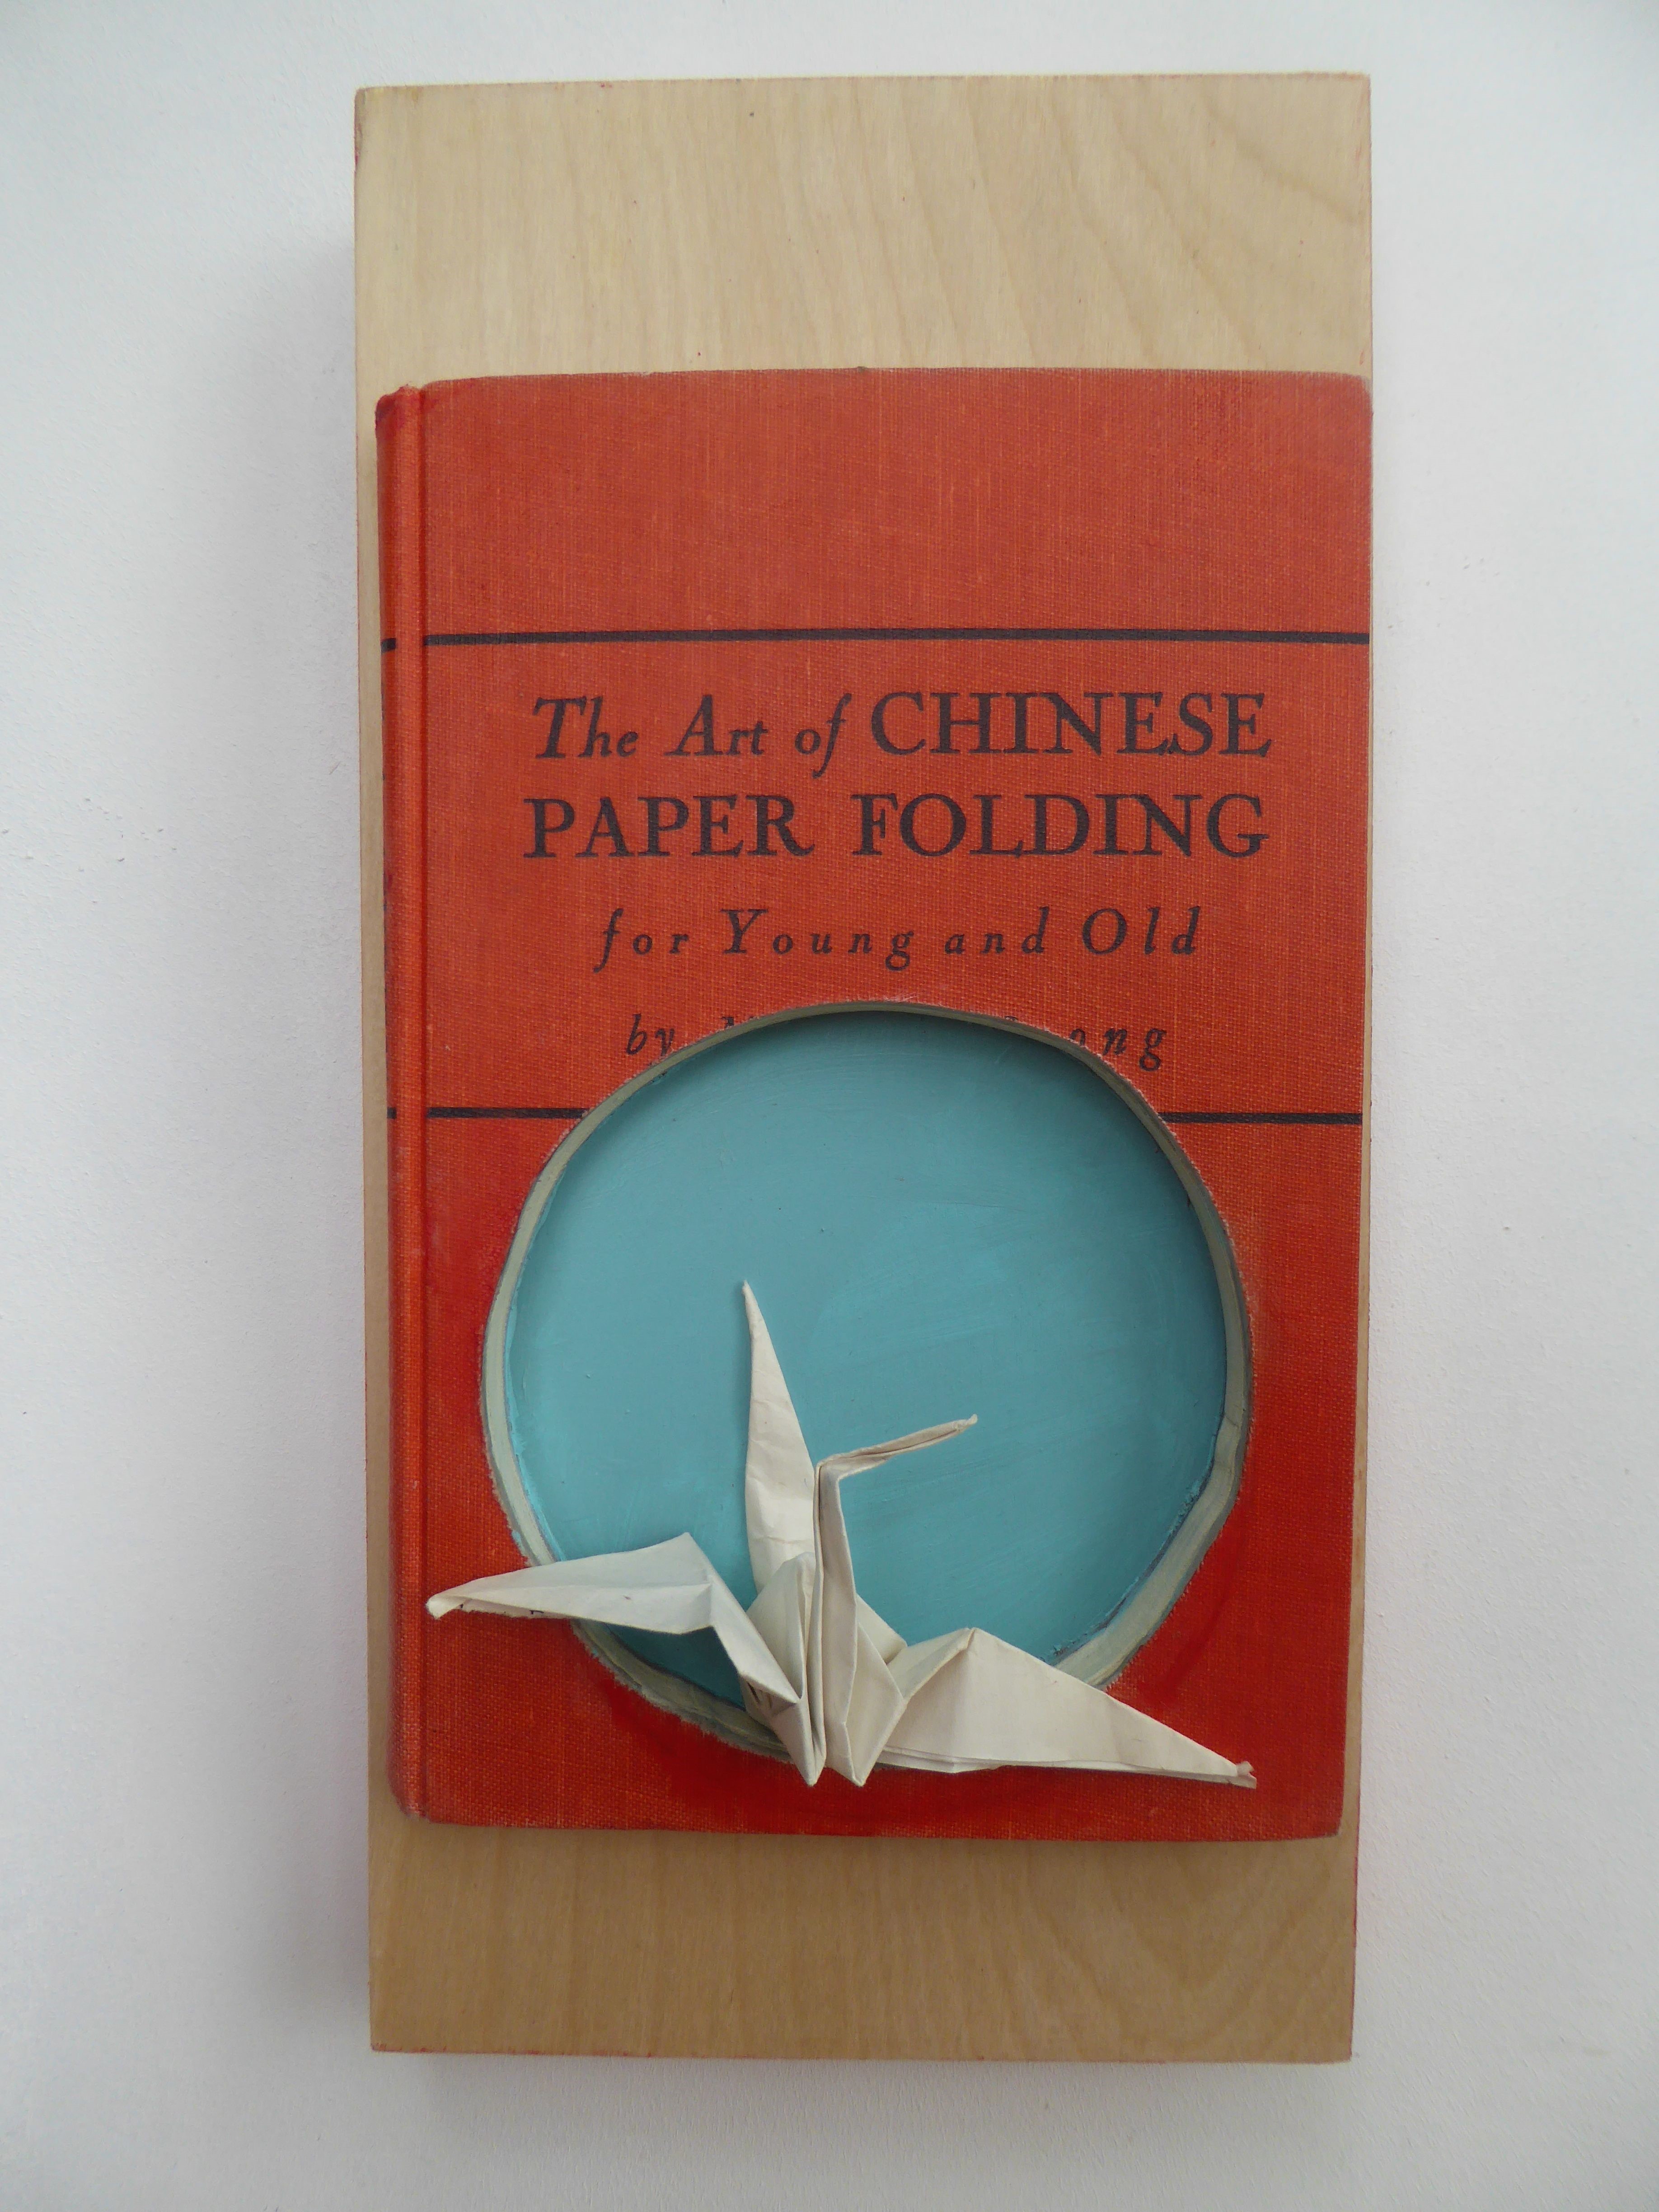 The Art of Chinese Paper Folding